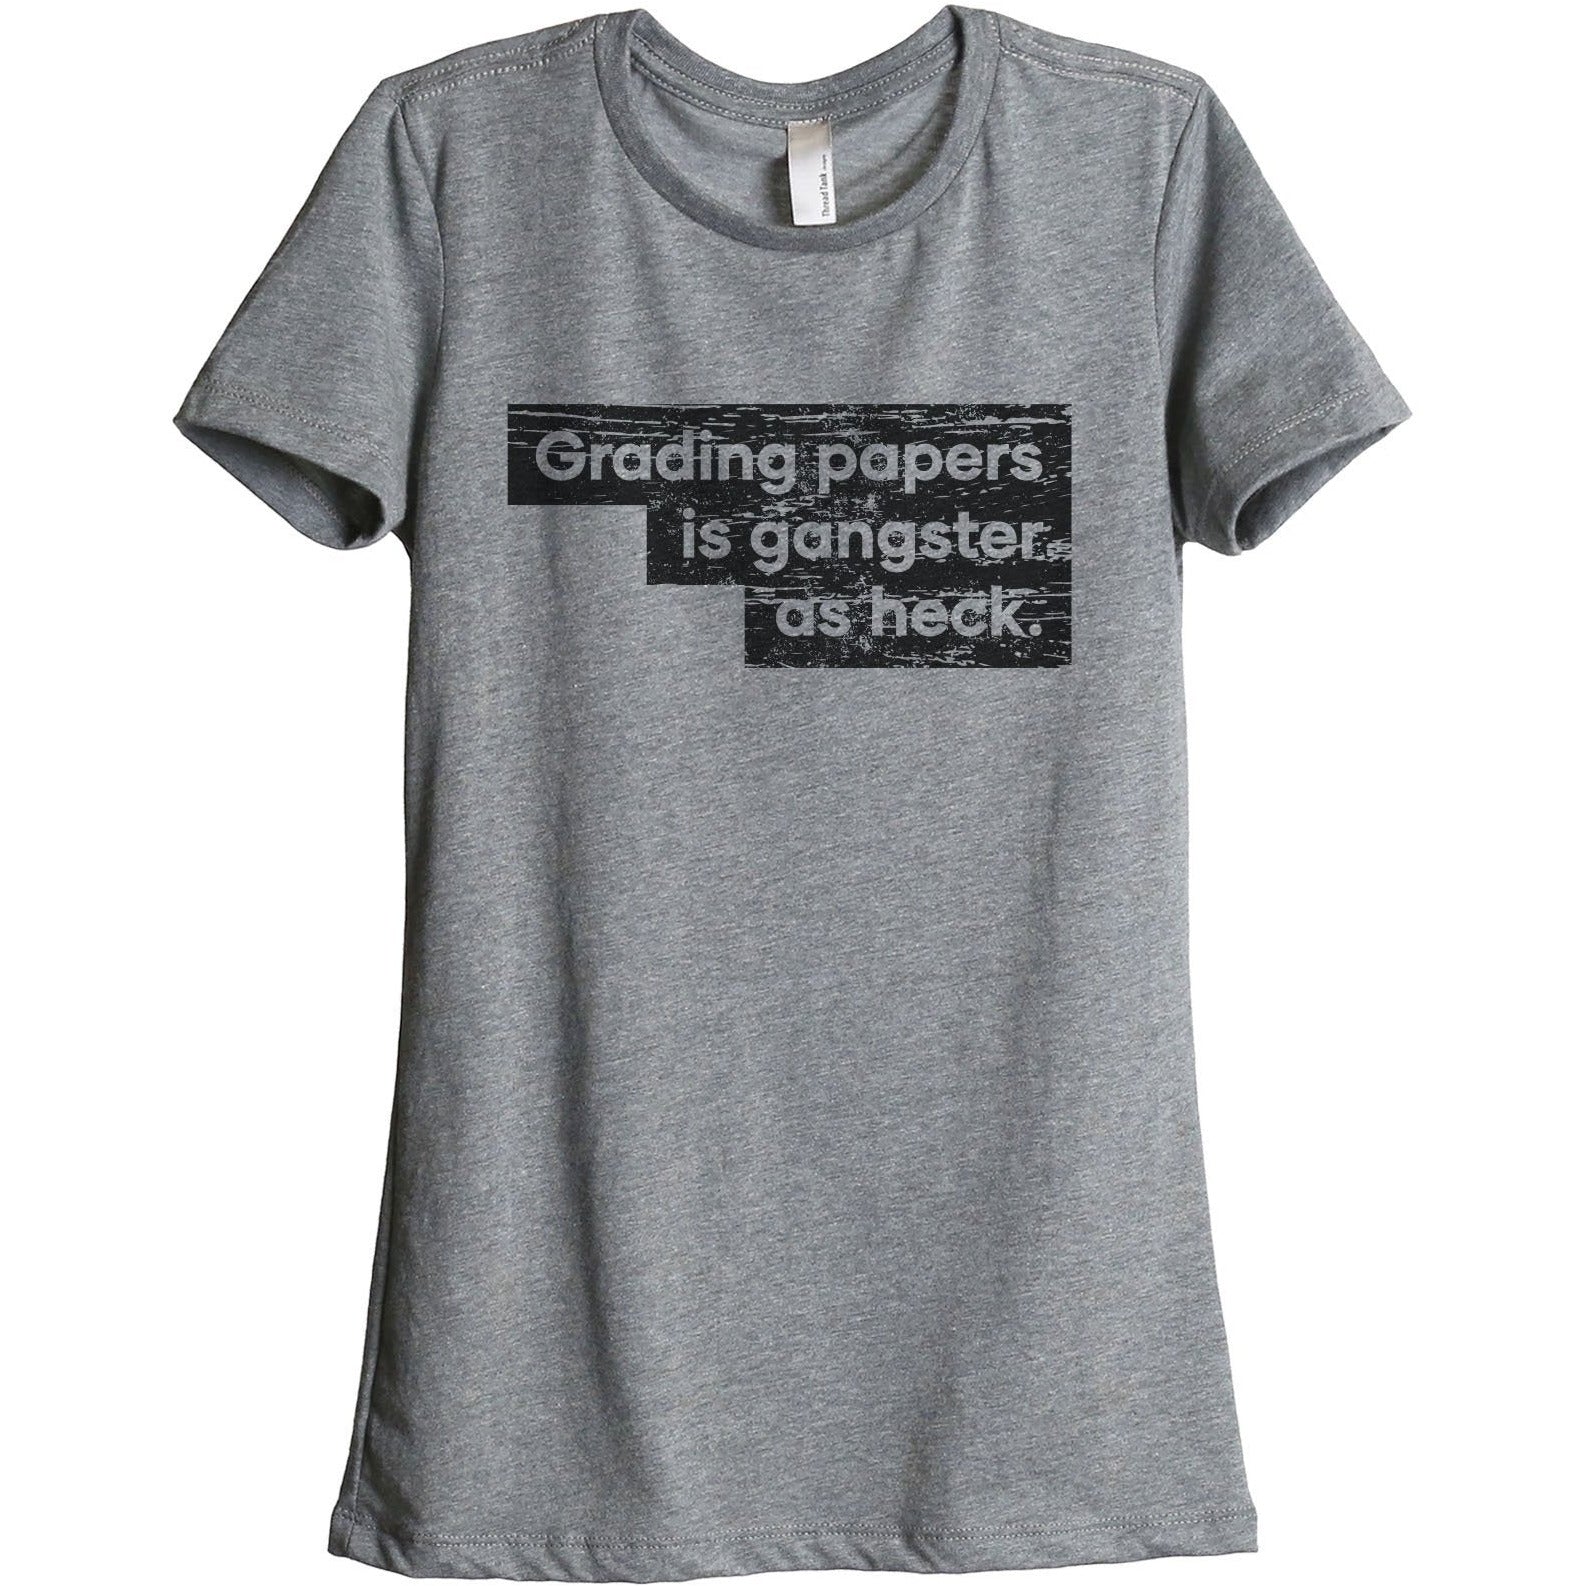 Grading Papers Is Gangster As Heck Women's Relaxed Crewneck T-Shirt Top Tee Heather Grey